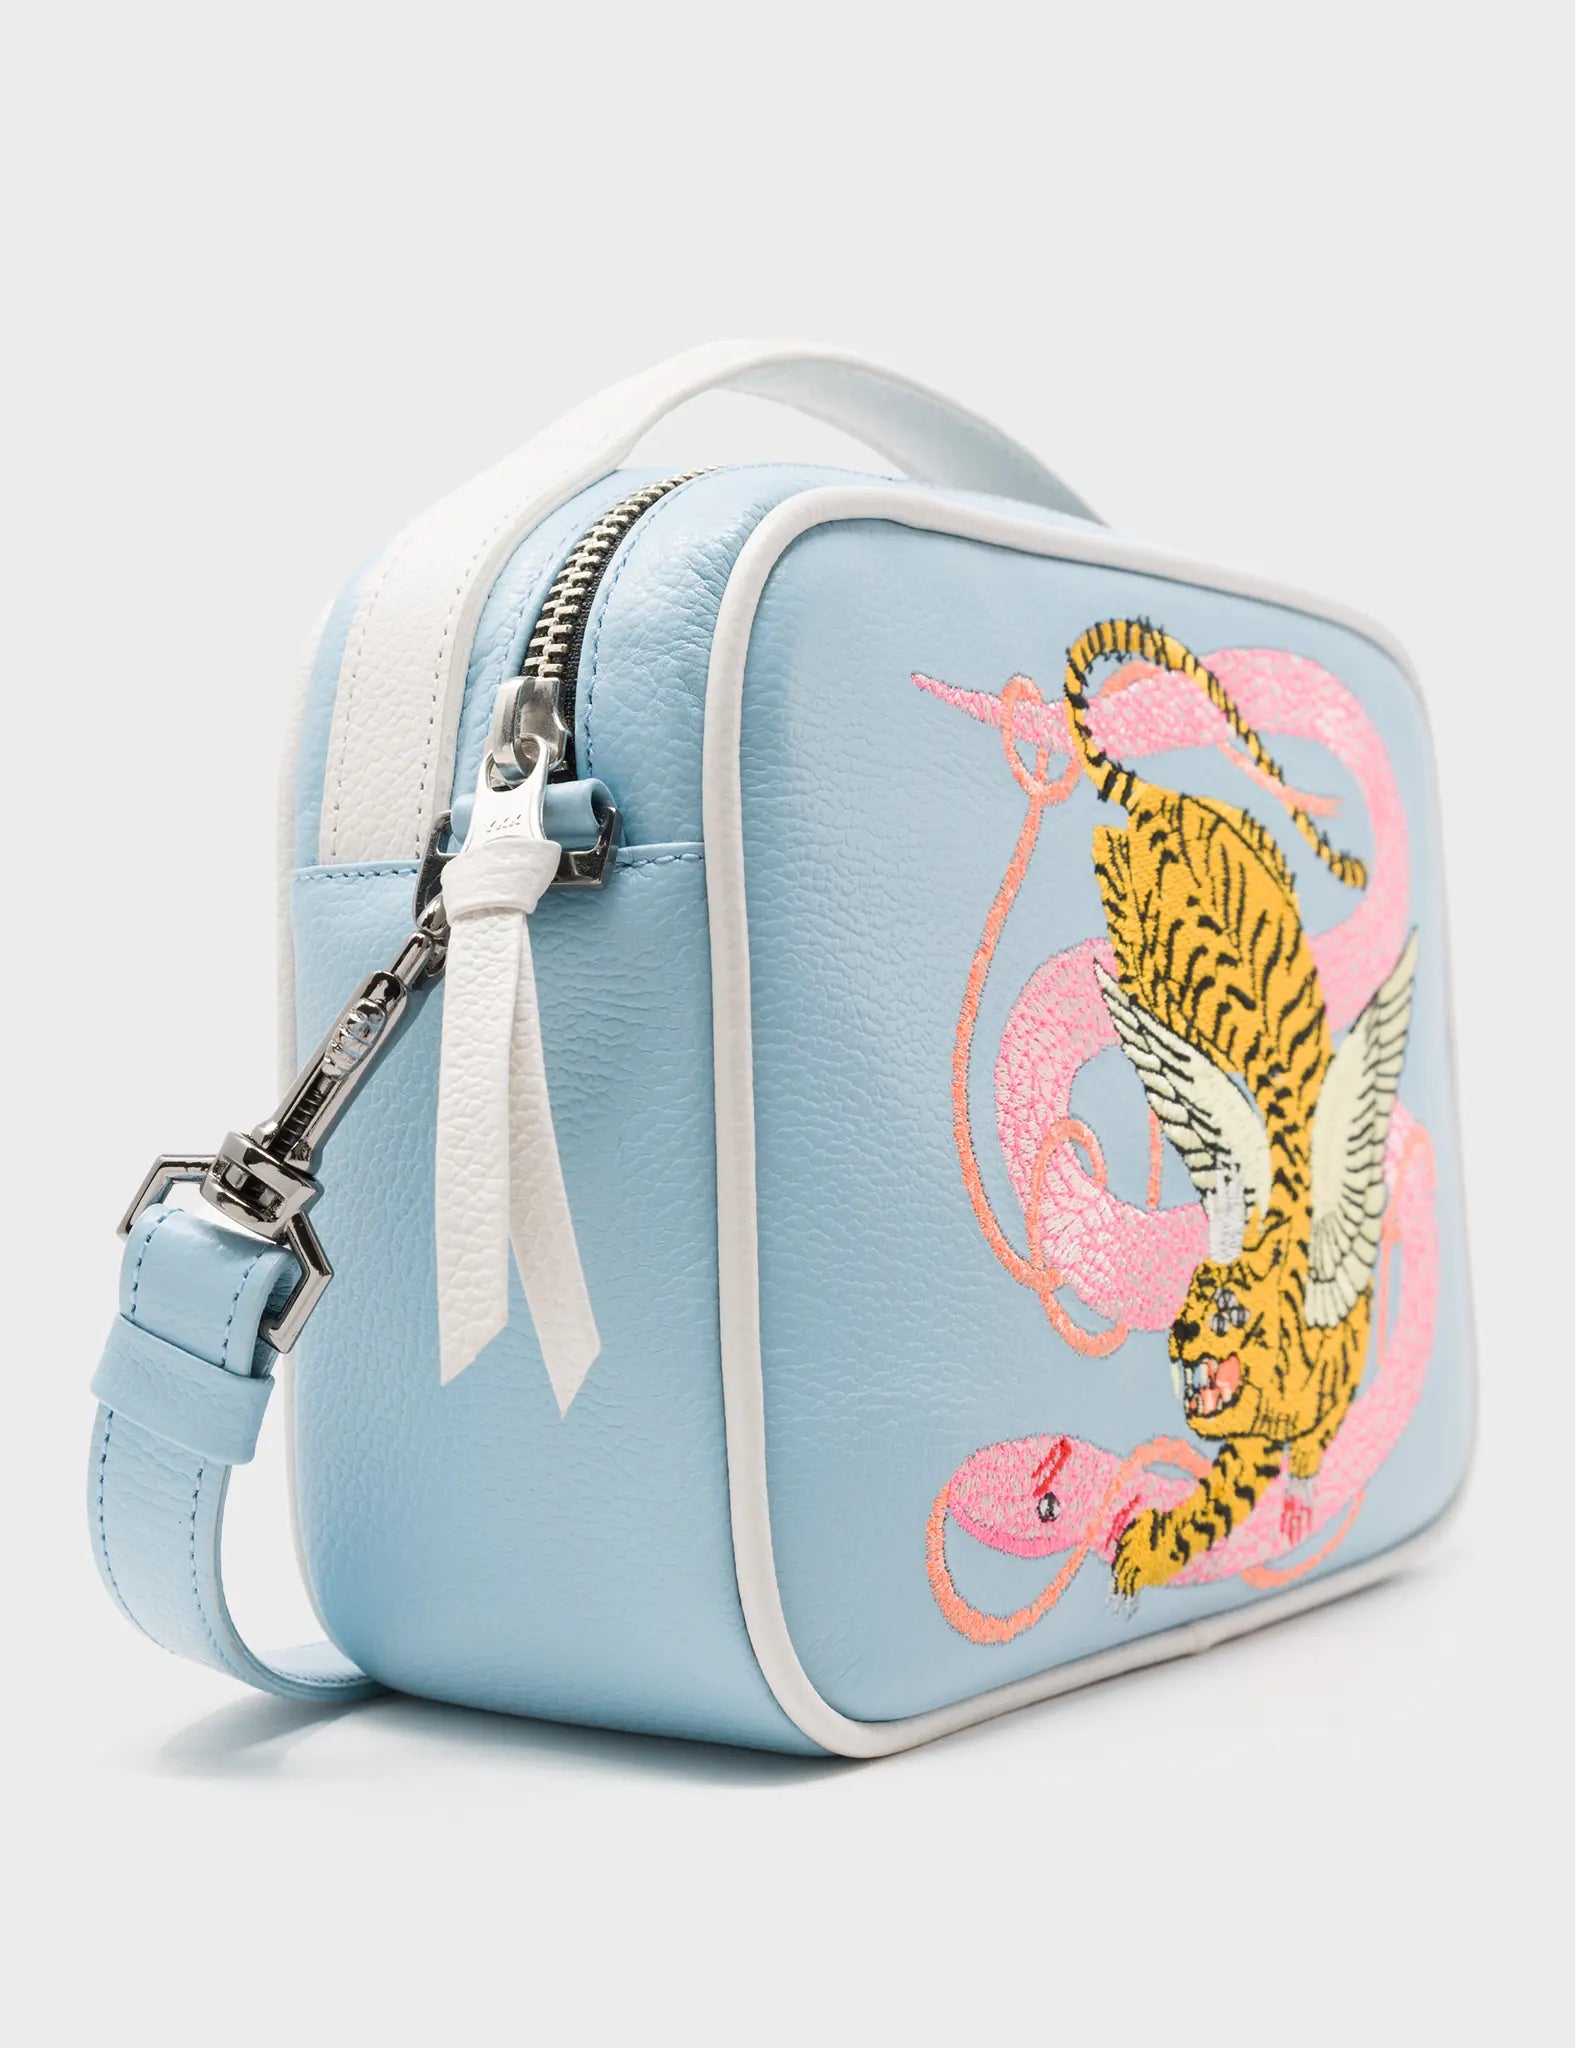 Stratosphere Blue Leather Crossbody Handbag - Tiger and Snake Embroidery - Side